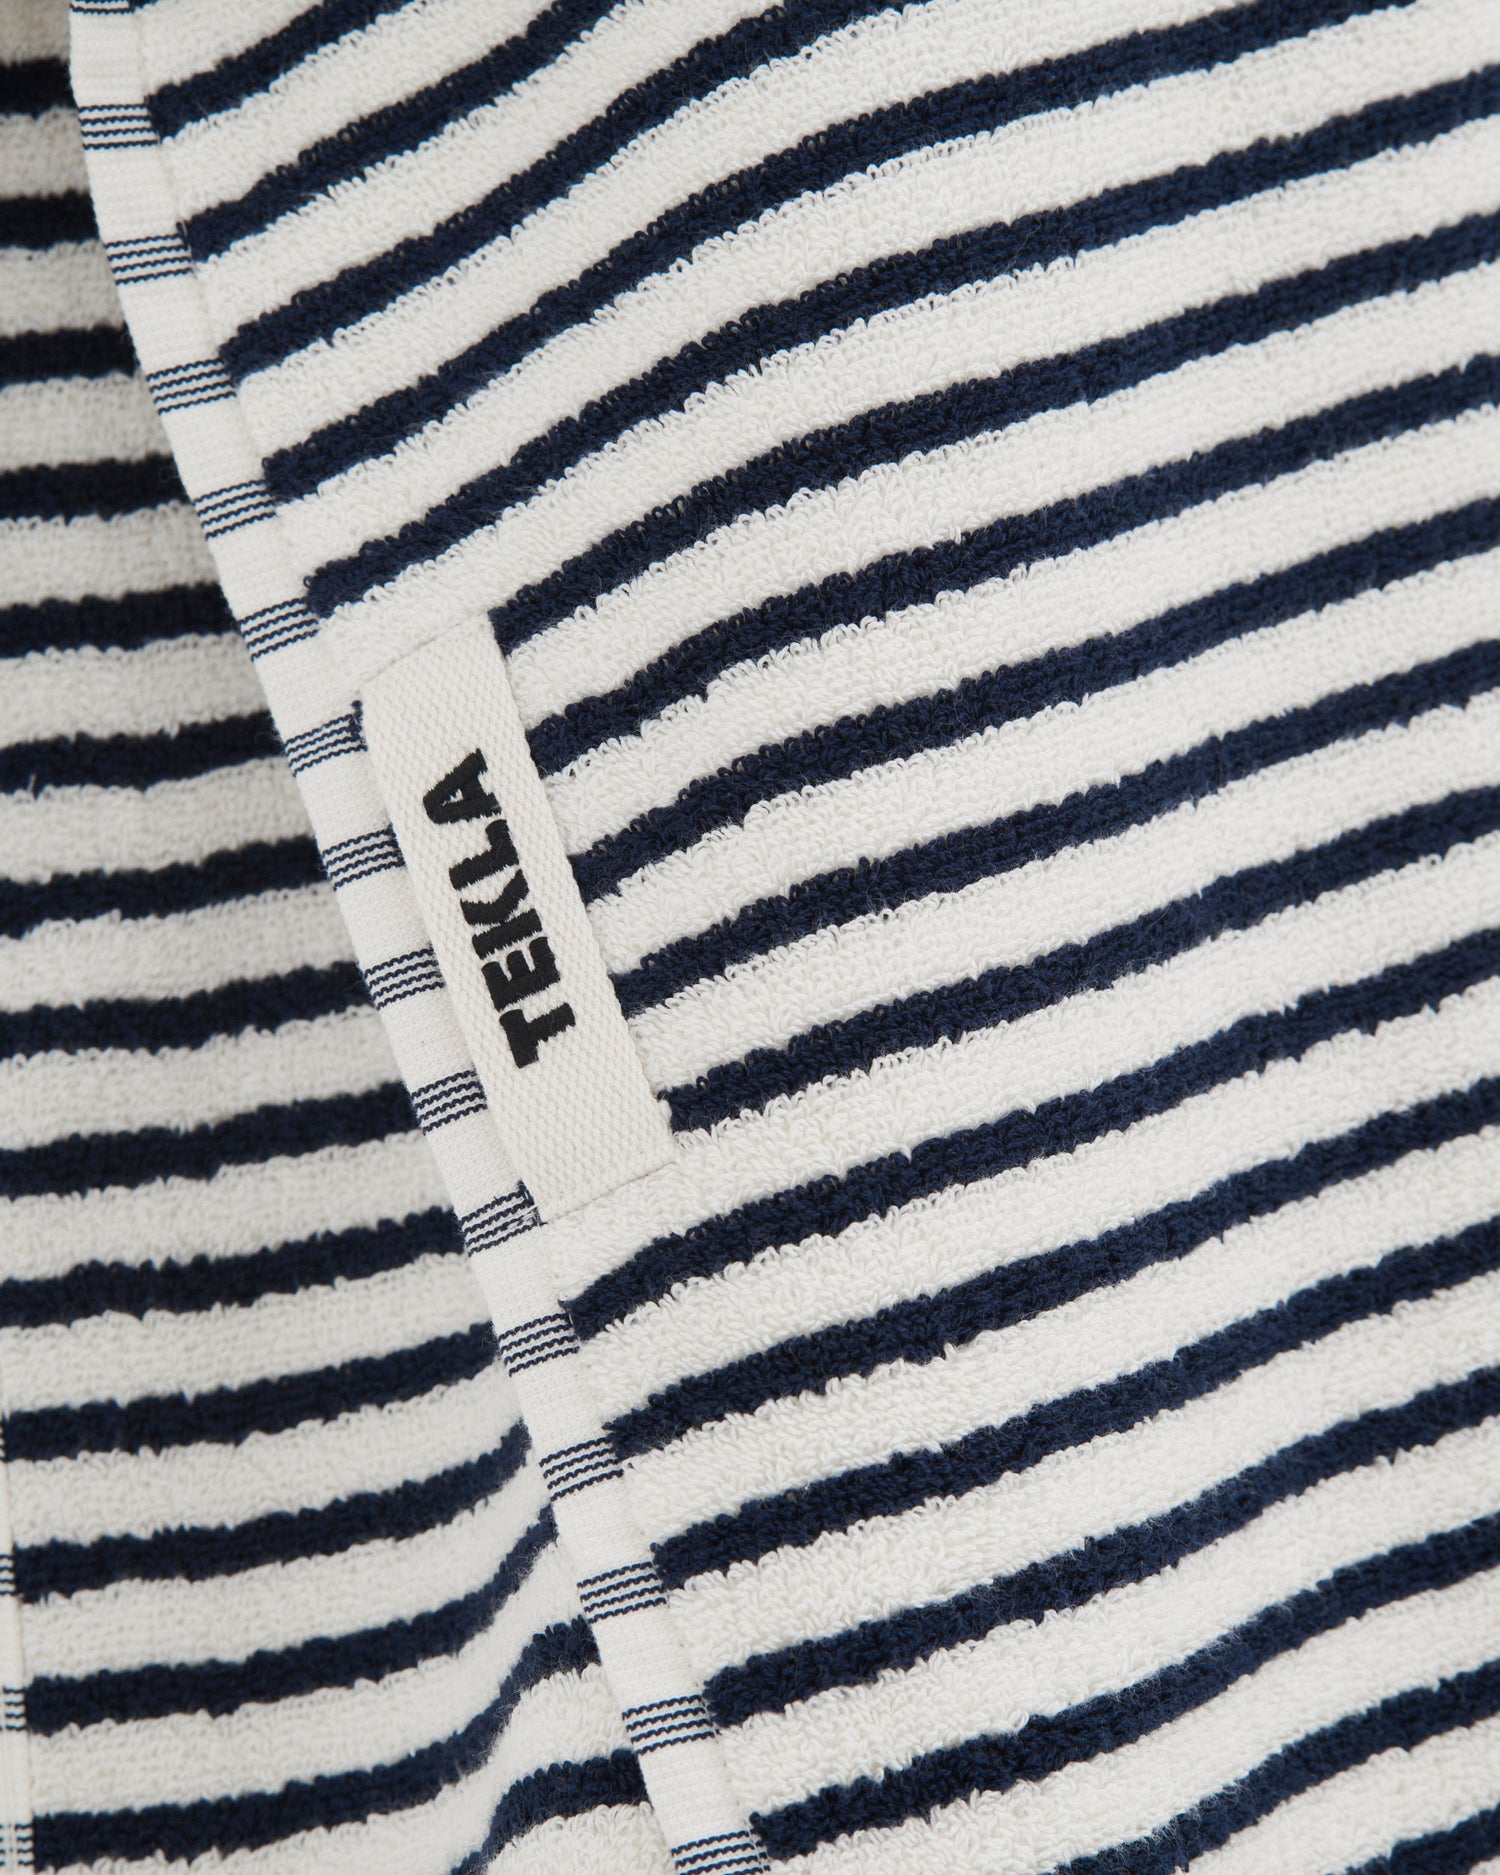 Terry Hand Towel - Striped, sailor stripes